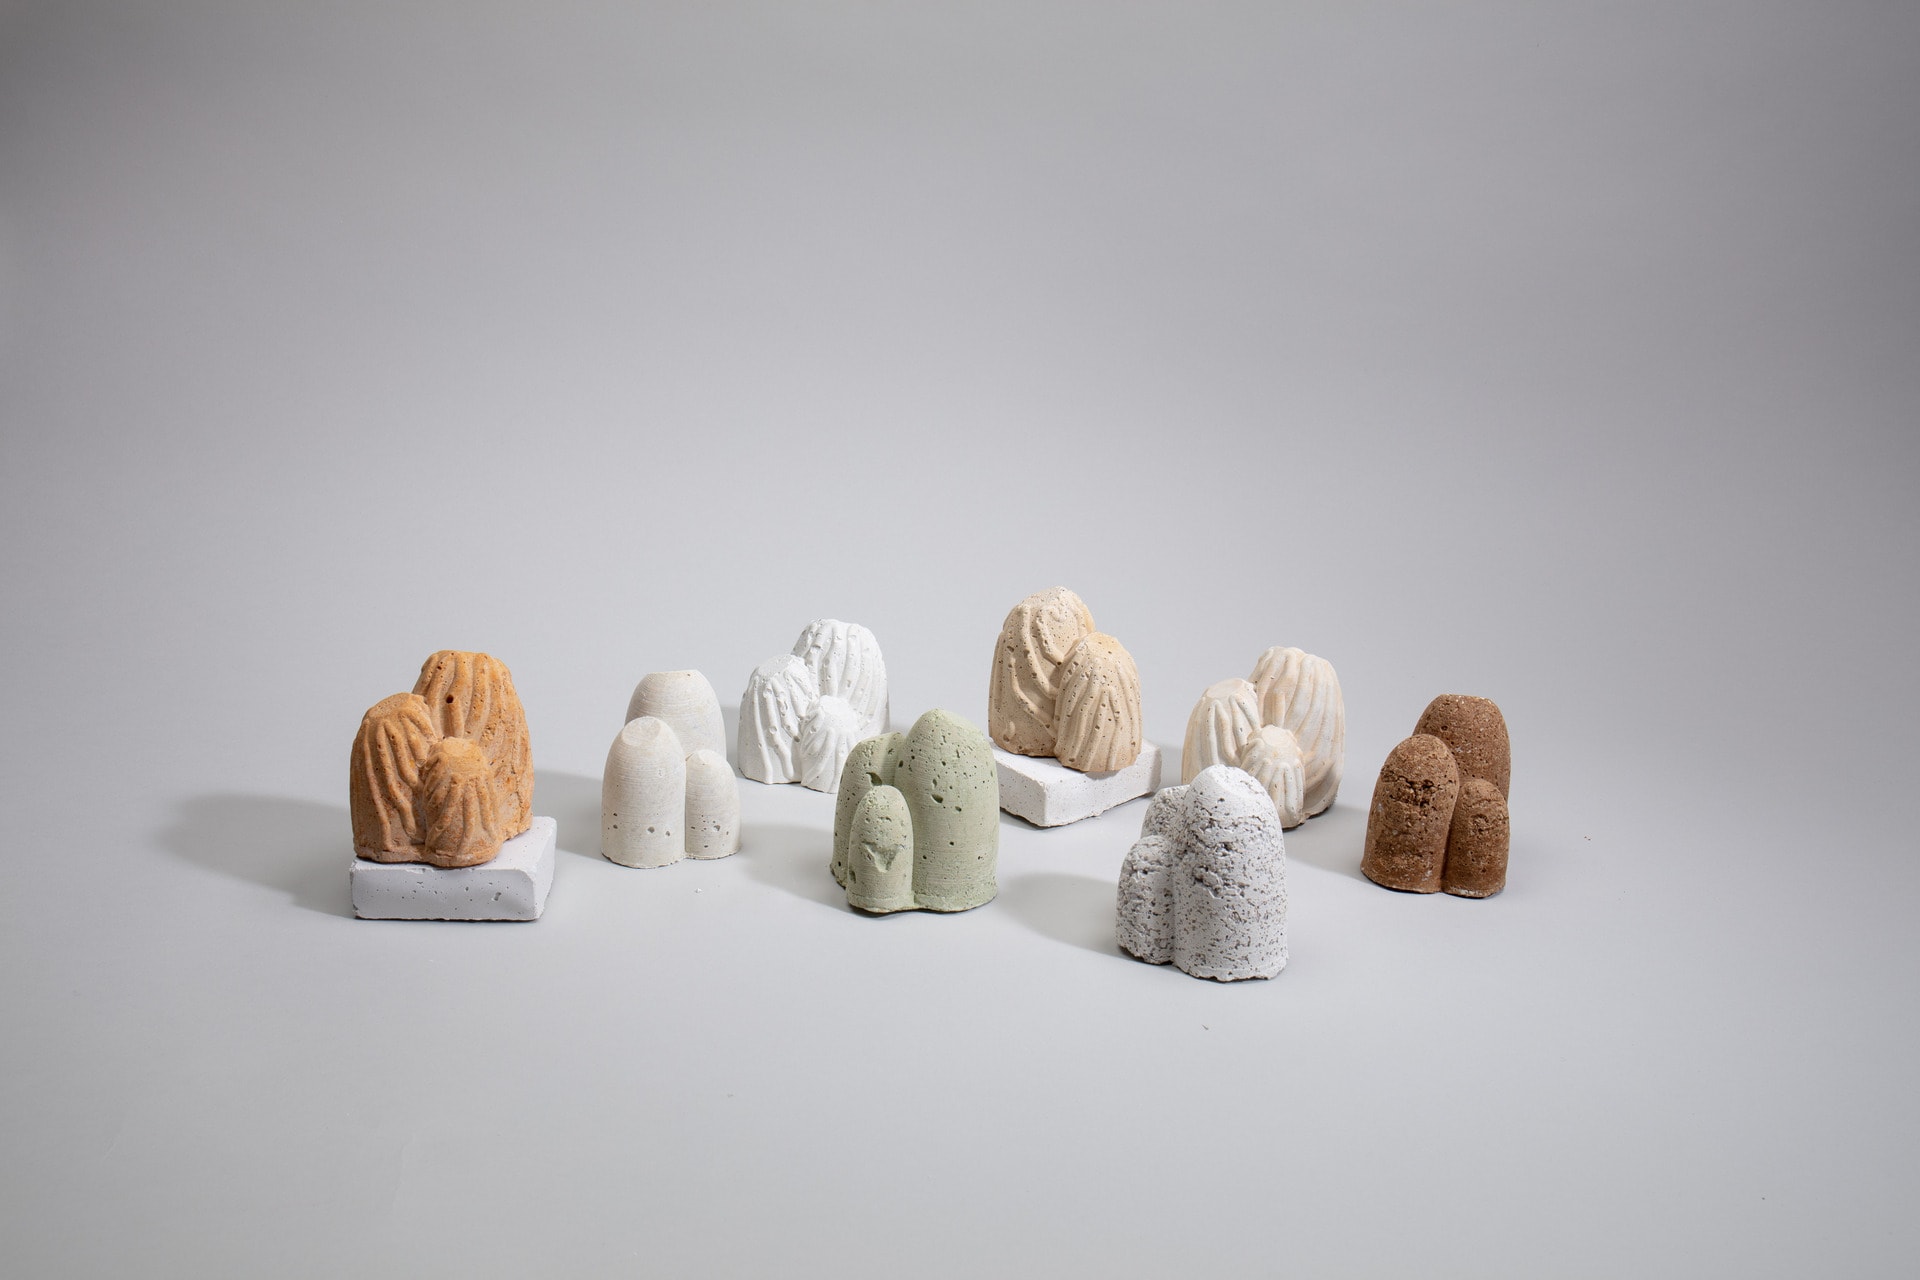 A collaboration with the colour alchemist Bethany Voak was made to develop natural pigments that can be added to the oyster capsules. 